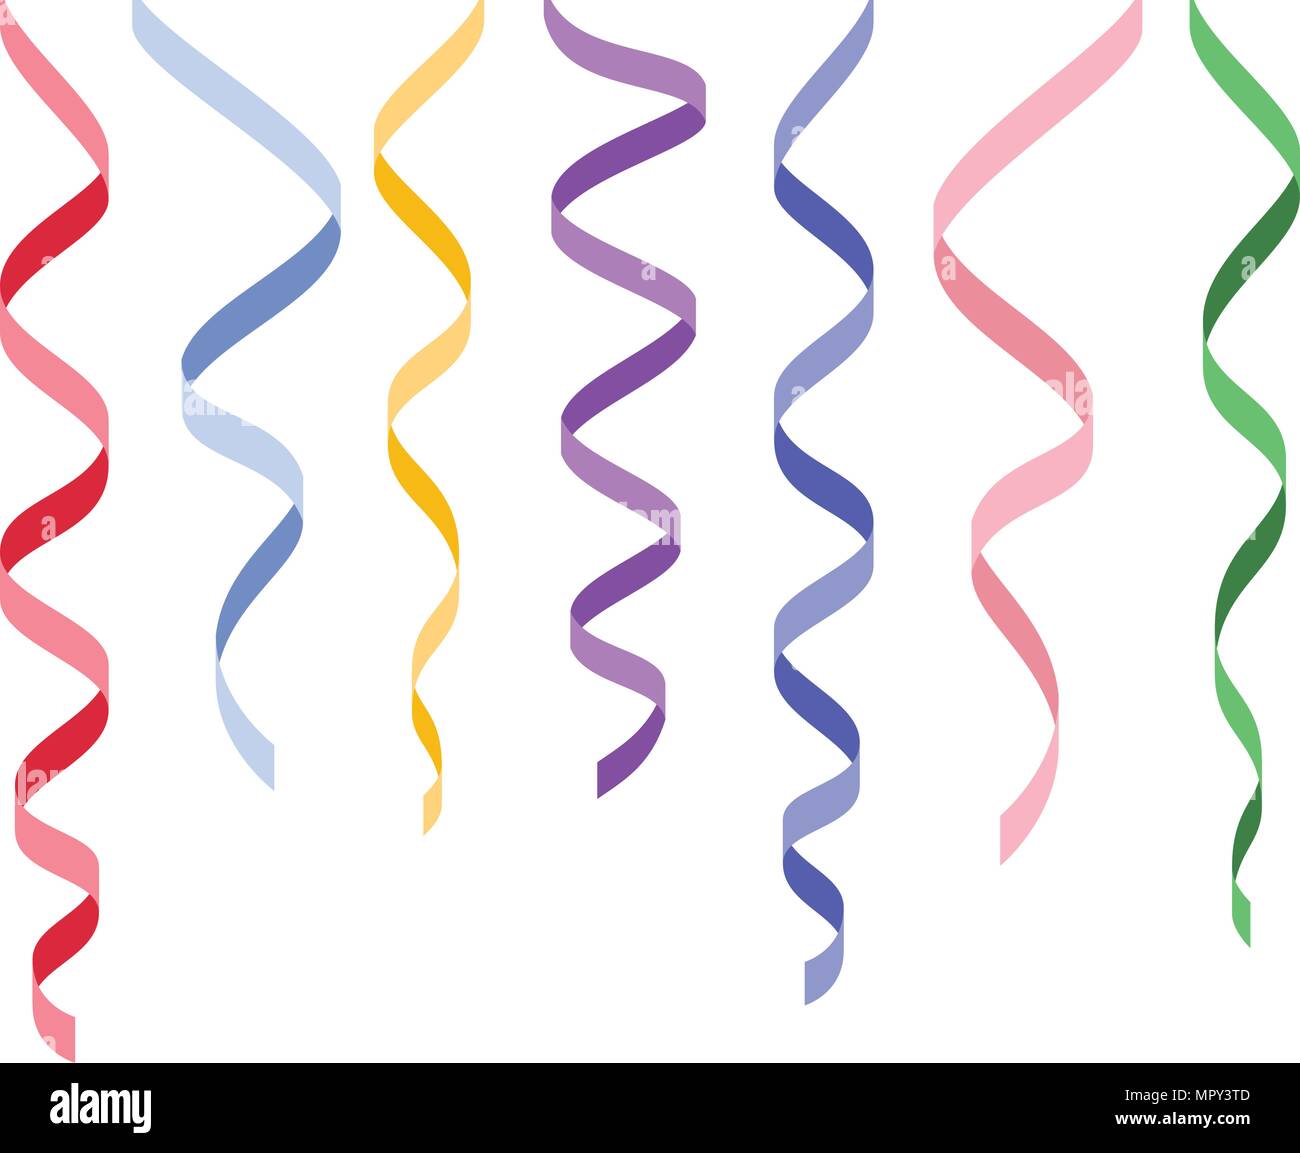 Black streamers Stock Vector Images - Alamy